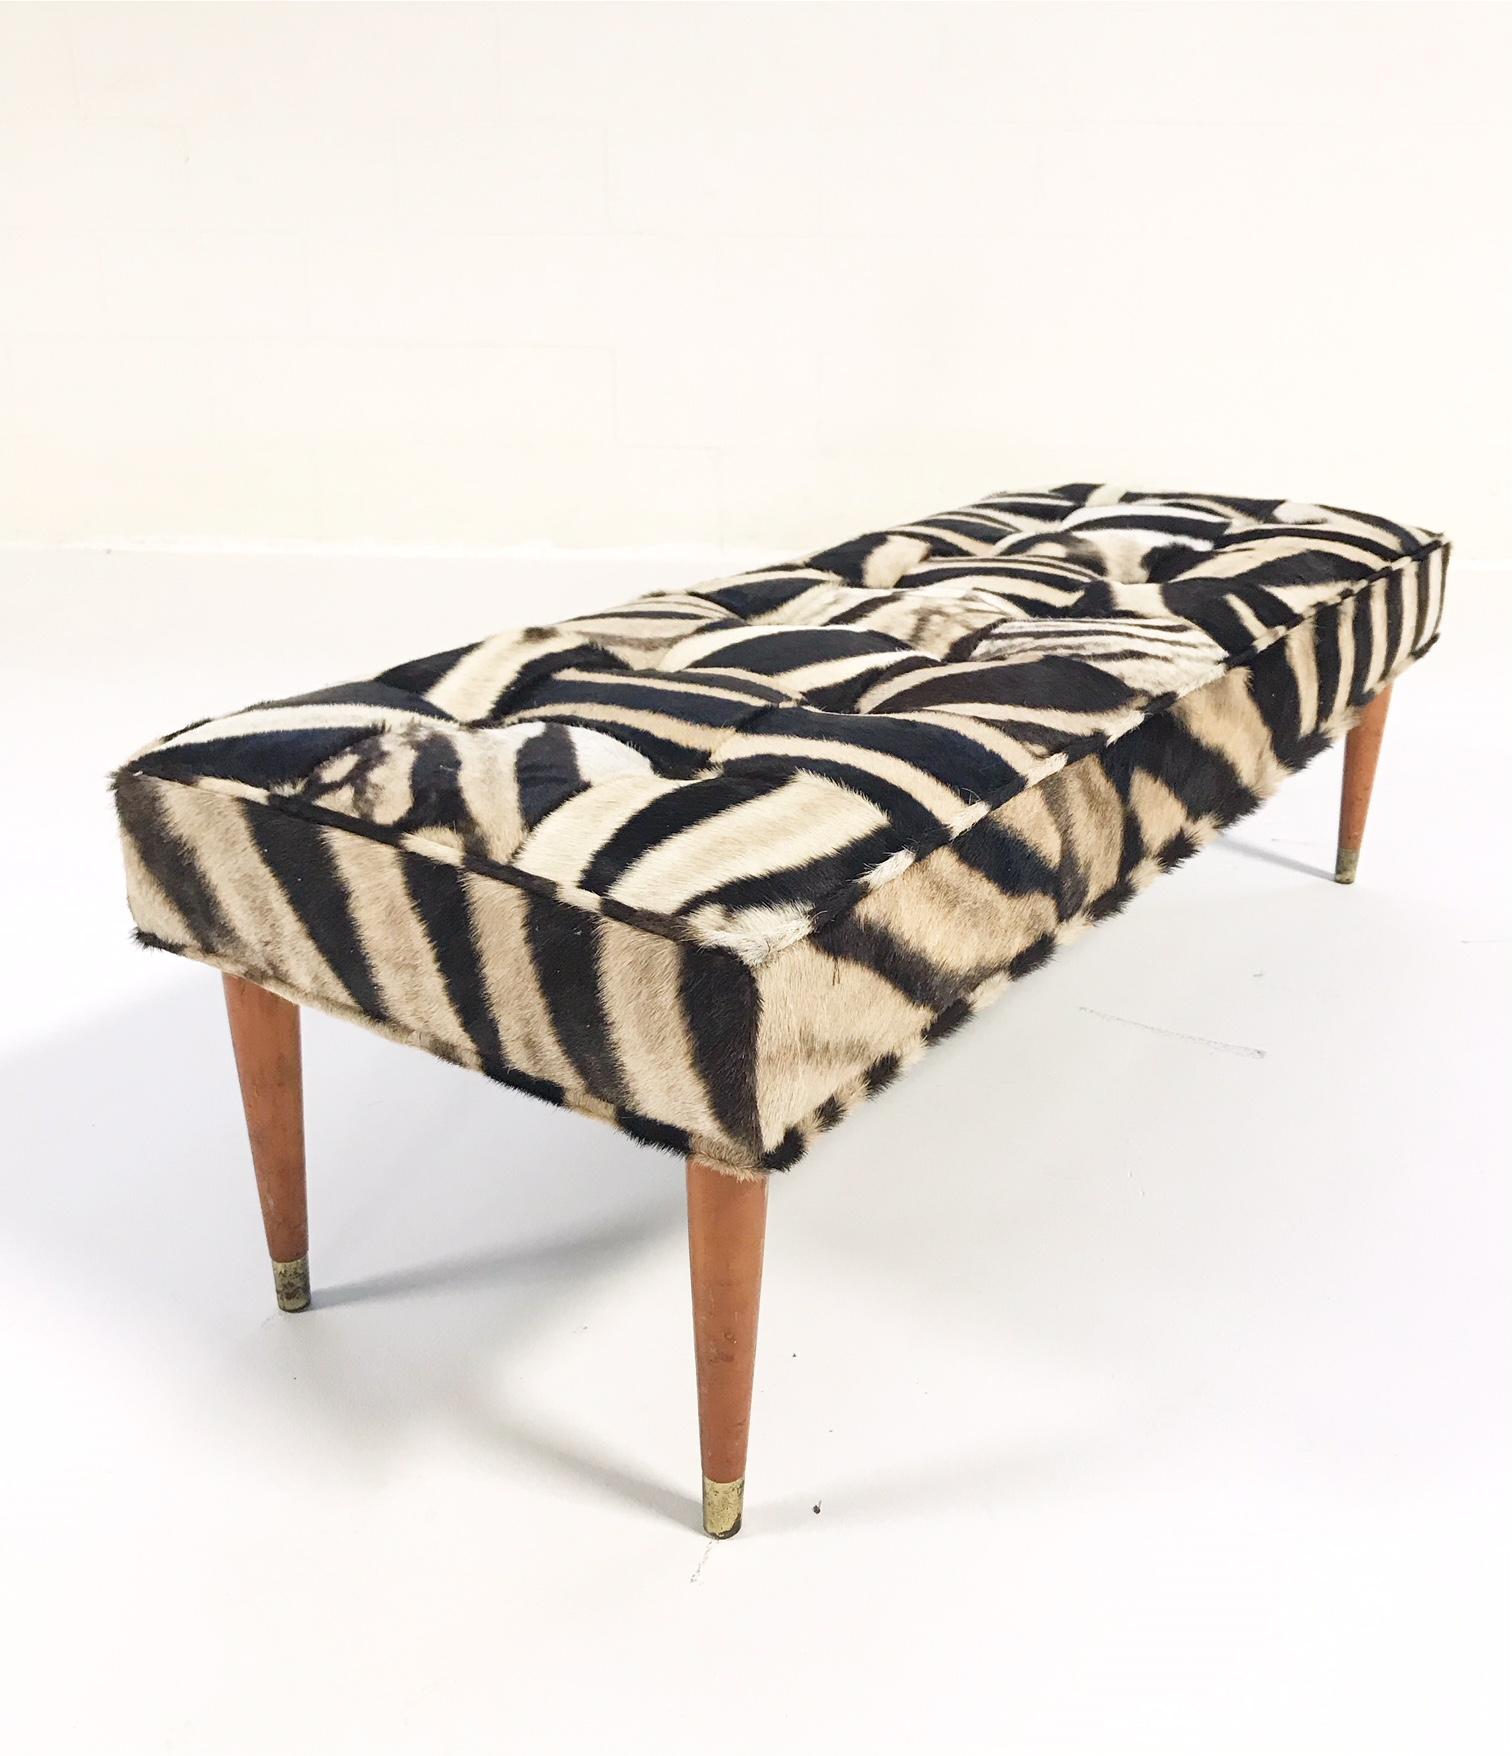 We keep picturing this gorgeous one-of-a-kind bench at the end of a beautiful bed or down a handsome hallway. Our designers chose to do a patchwork zebra hide as an extra design detail, complementing the simple wood and brass straight